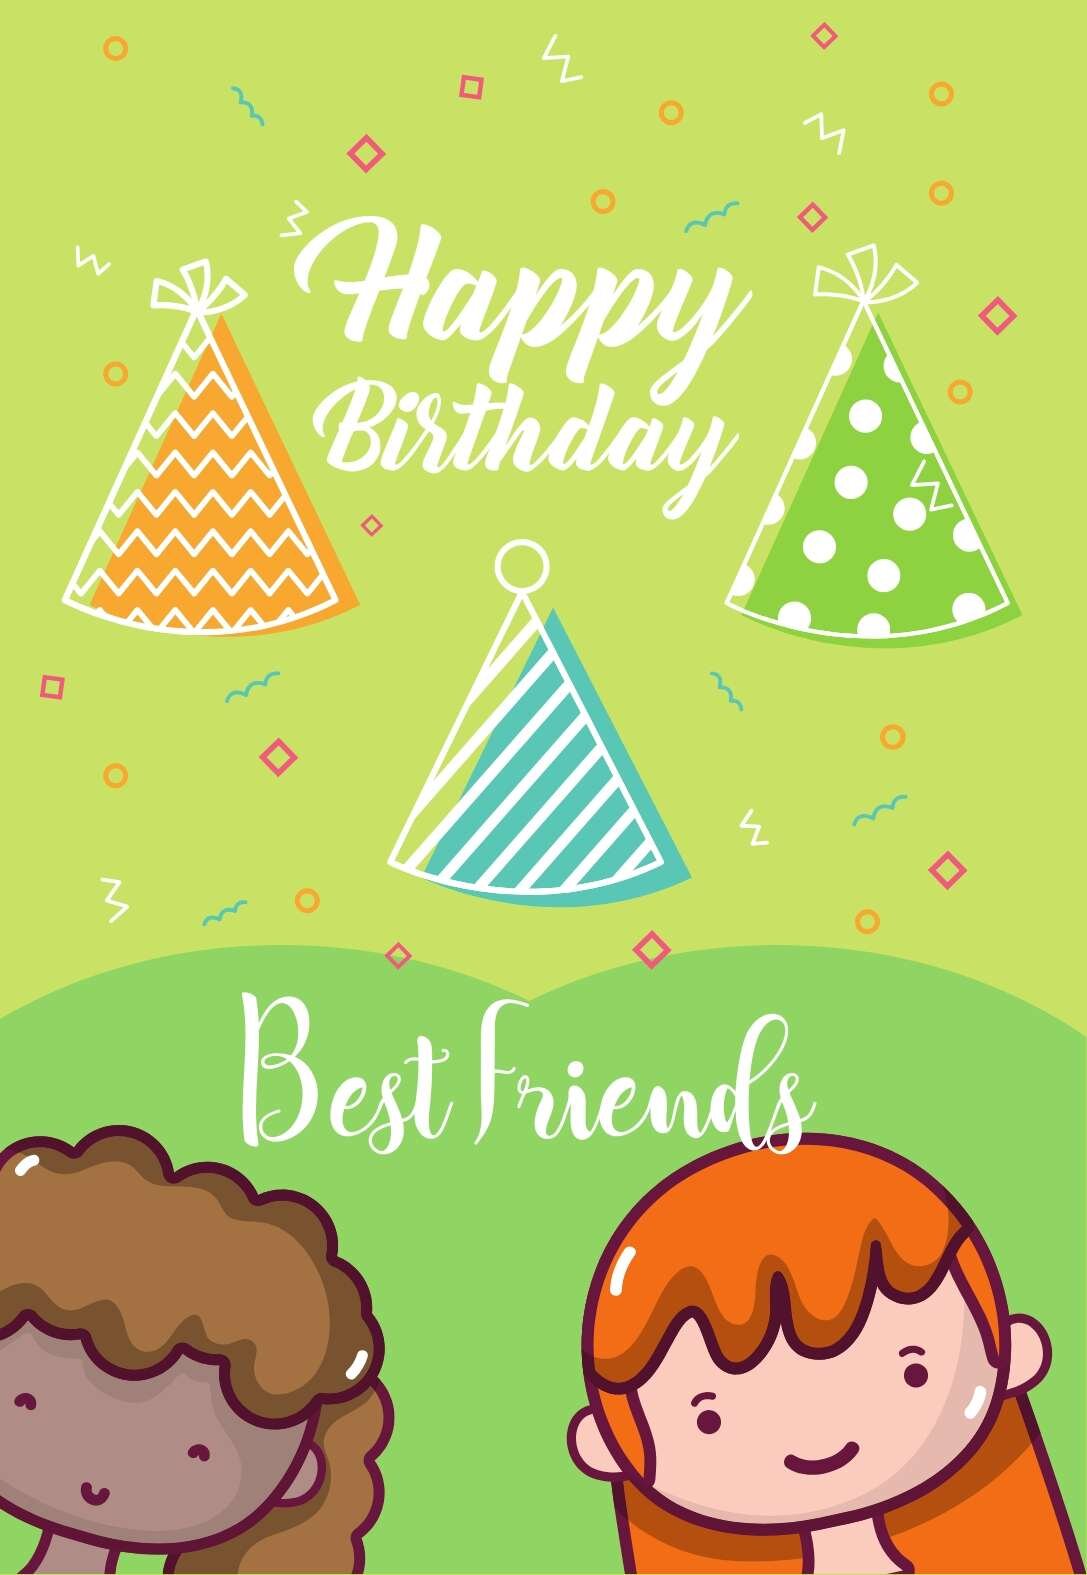 23 Printable Birthday Cards for a Friend or Best Friend — PRINTBIRTHDAY ...